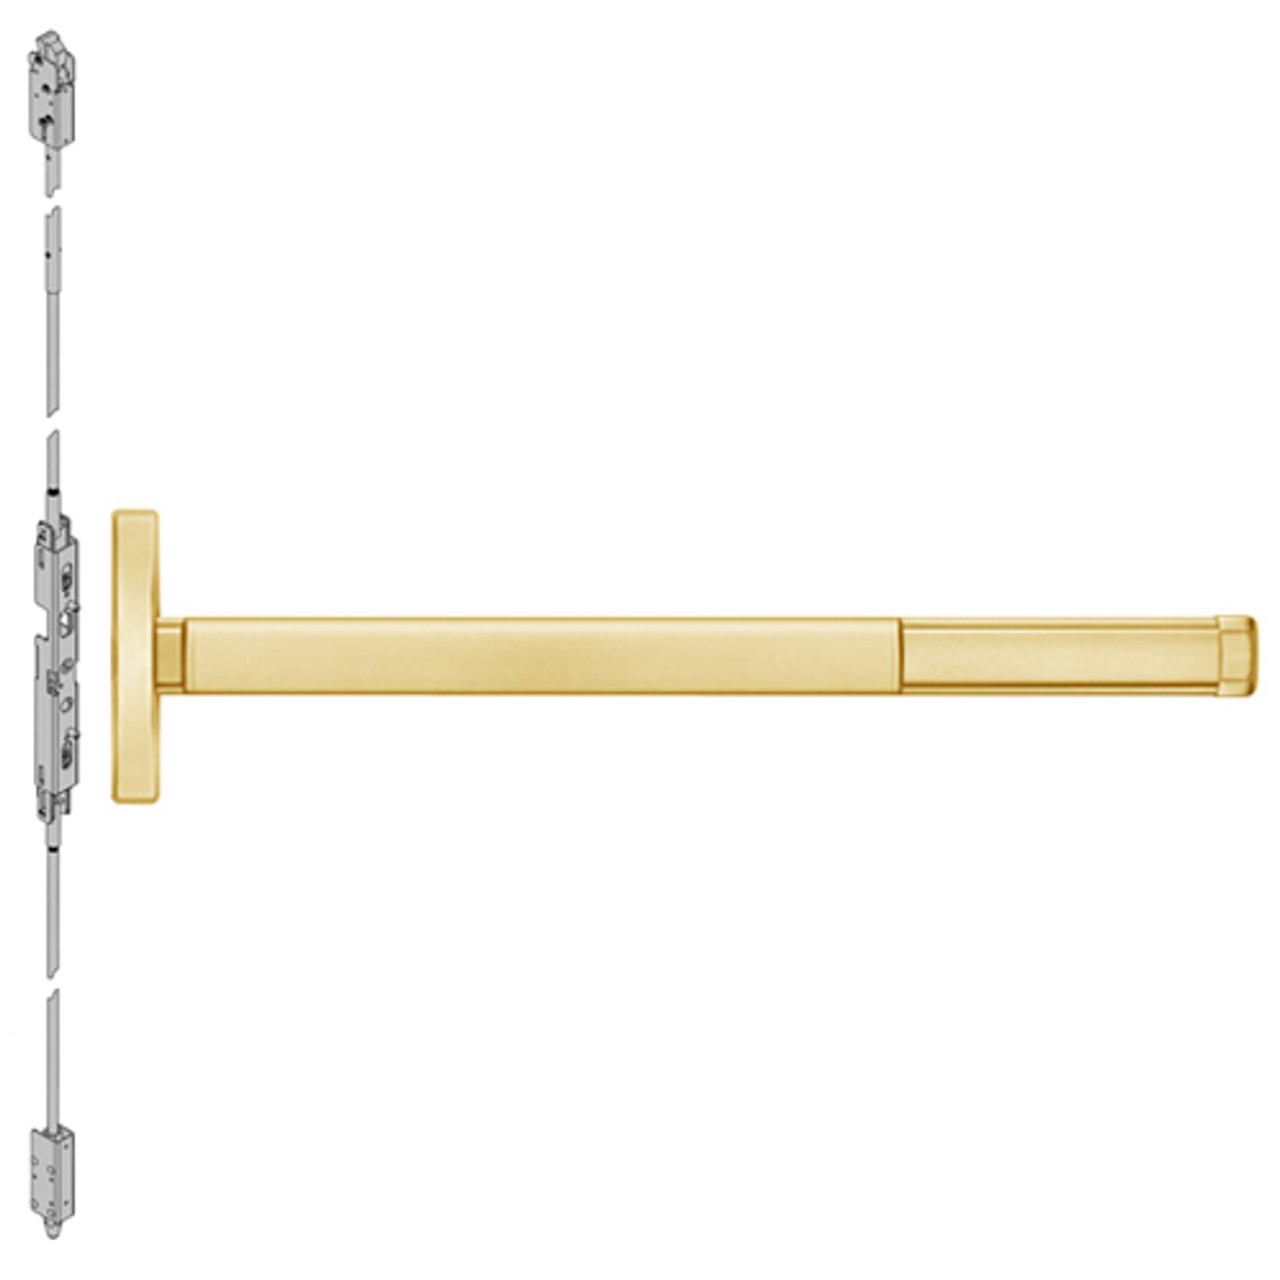 ELRFL2601LBR-605-48 PHI 2600 Series Fire Rated Concealed Vertical Rod Exit Device with Electric Latch Retraction Prepped for Cover Plate in Bright Brass Finish